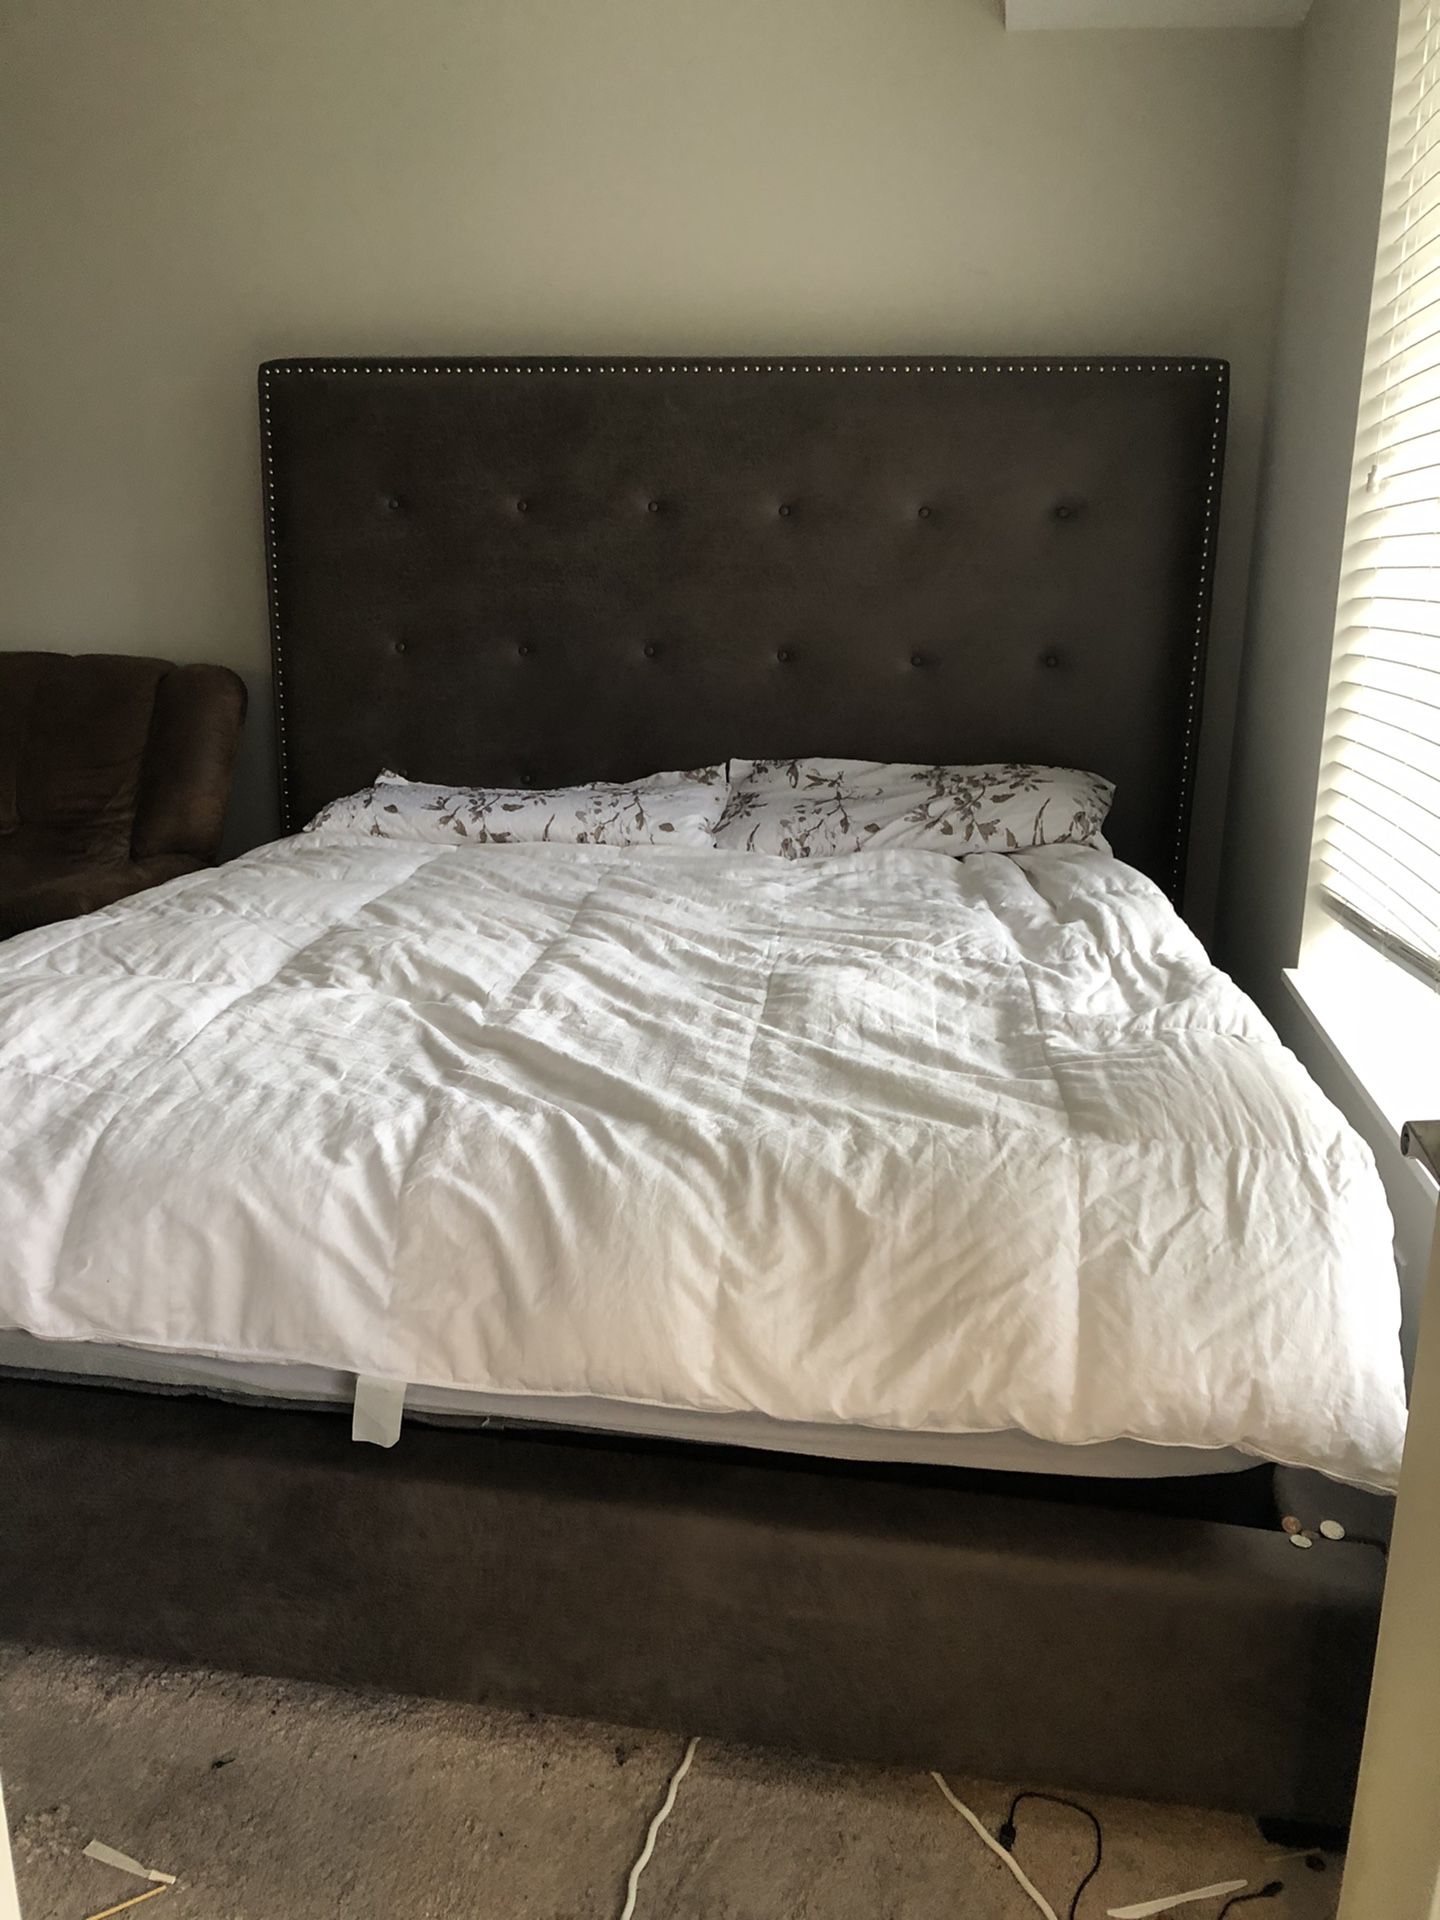 King size bed complete